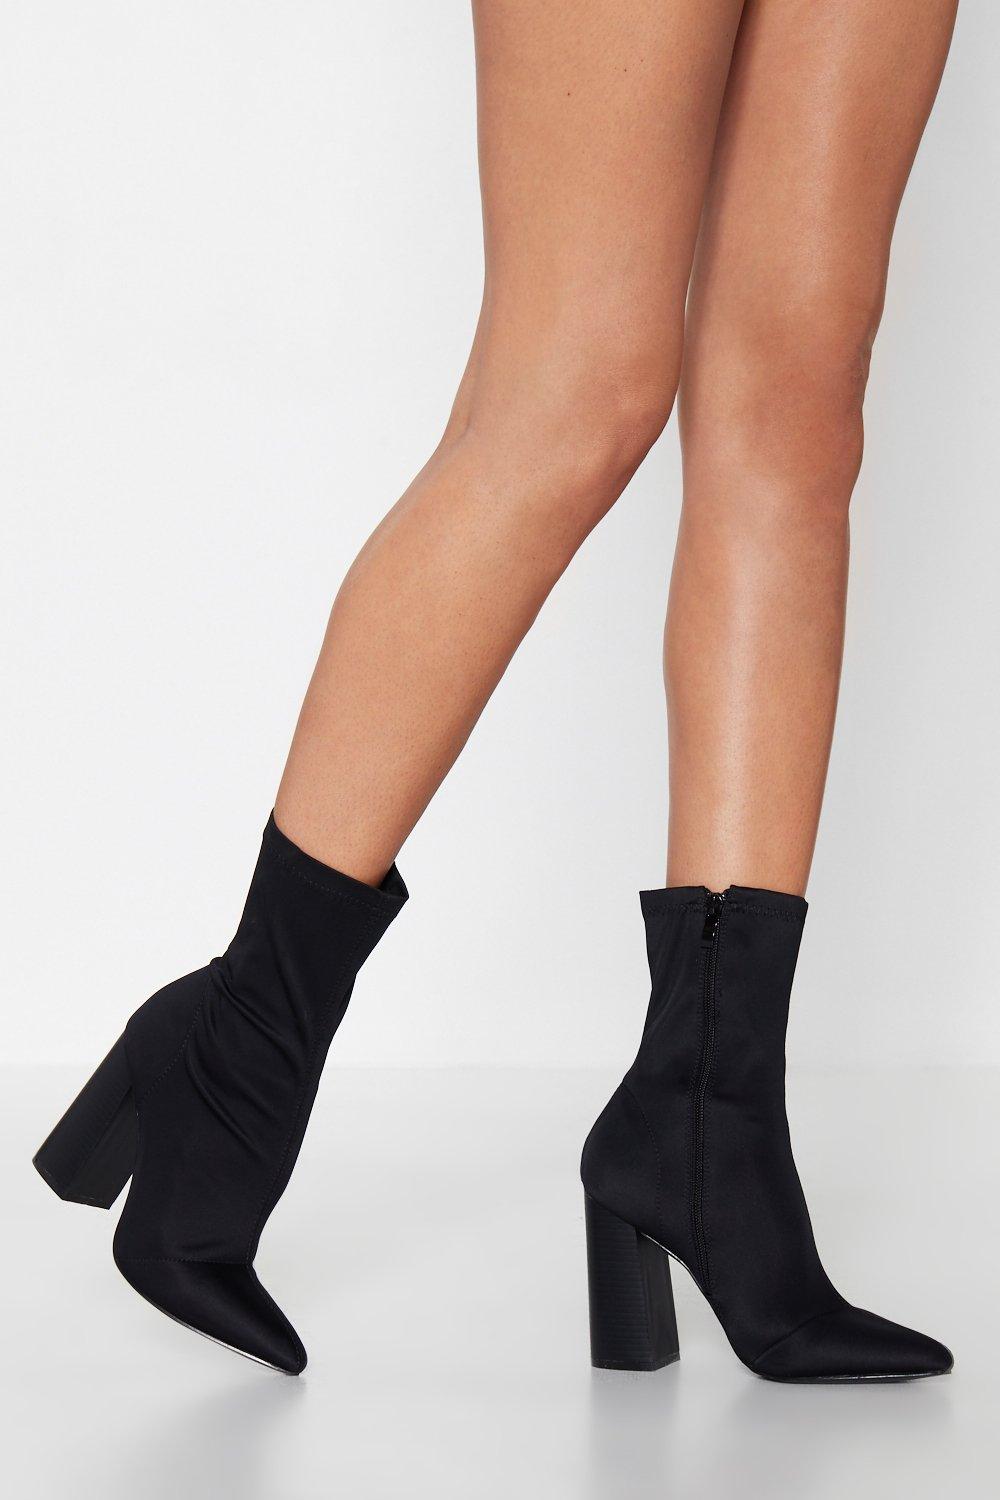 Case in Point Sock Boot | Nasty Gal